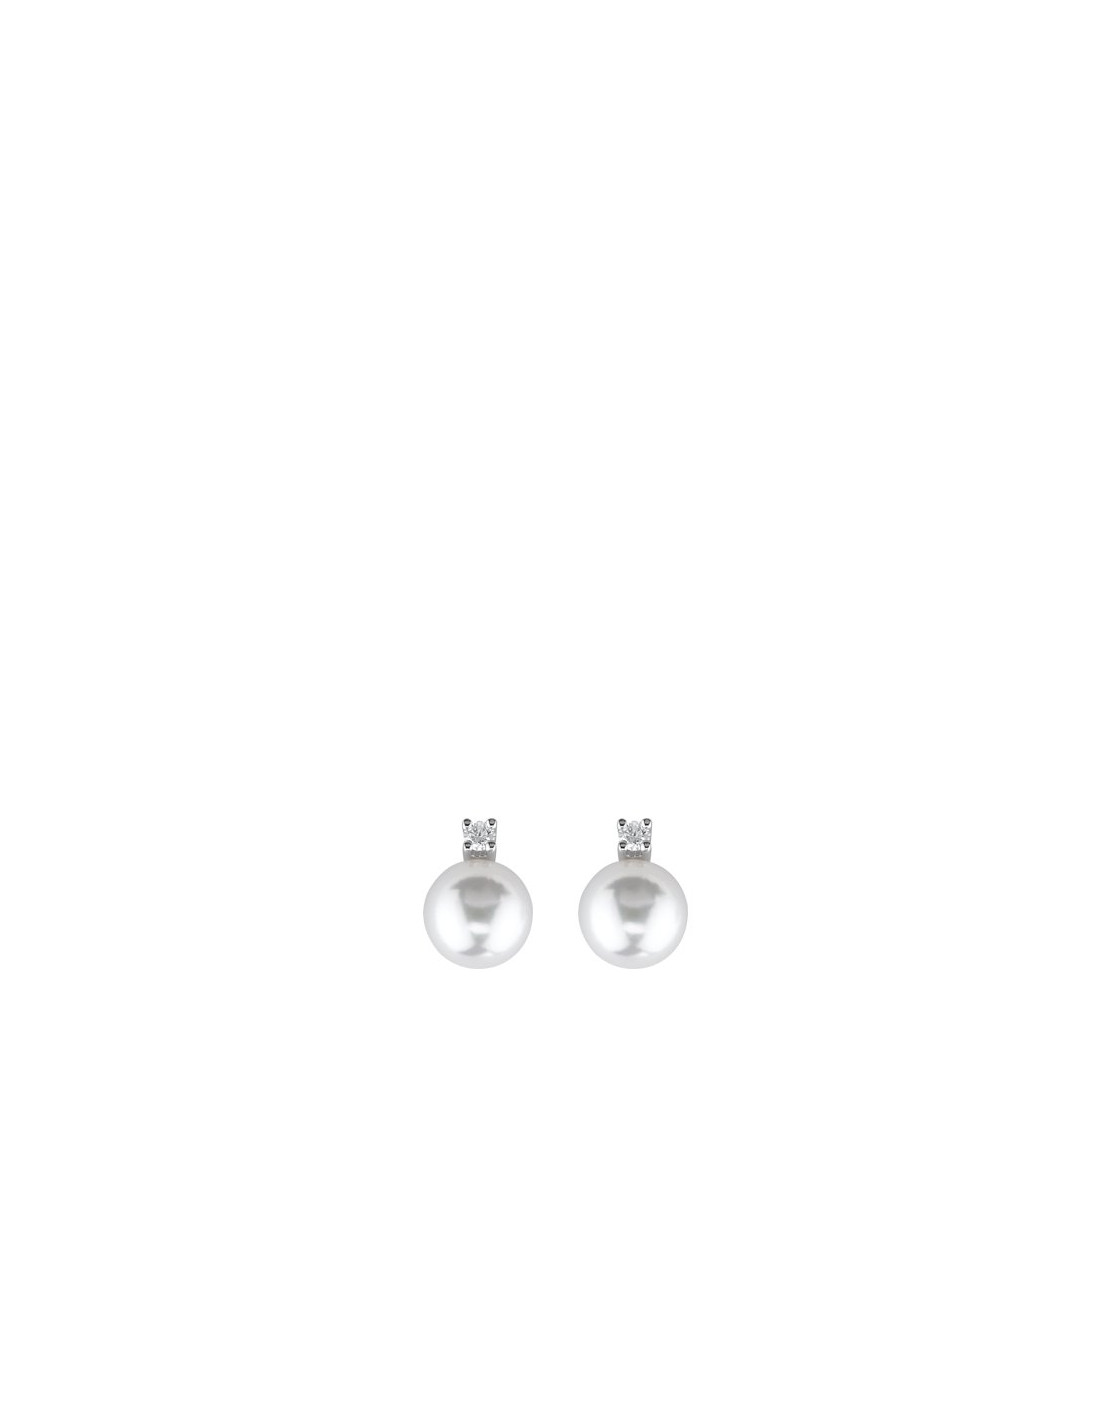 DAMIANI LE PERLE white gold earrings with diamonds and pearls 5.50 - 6.